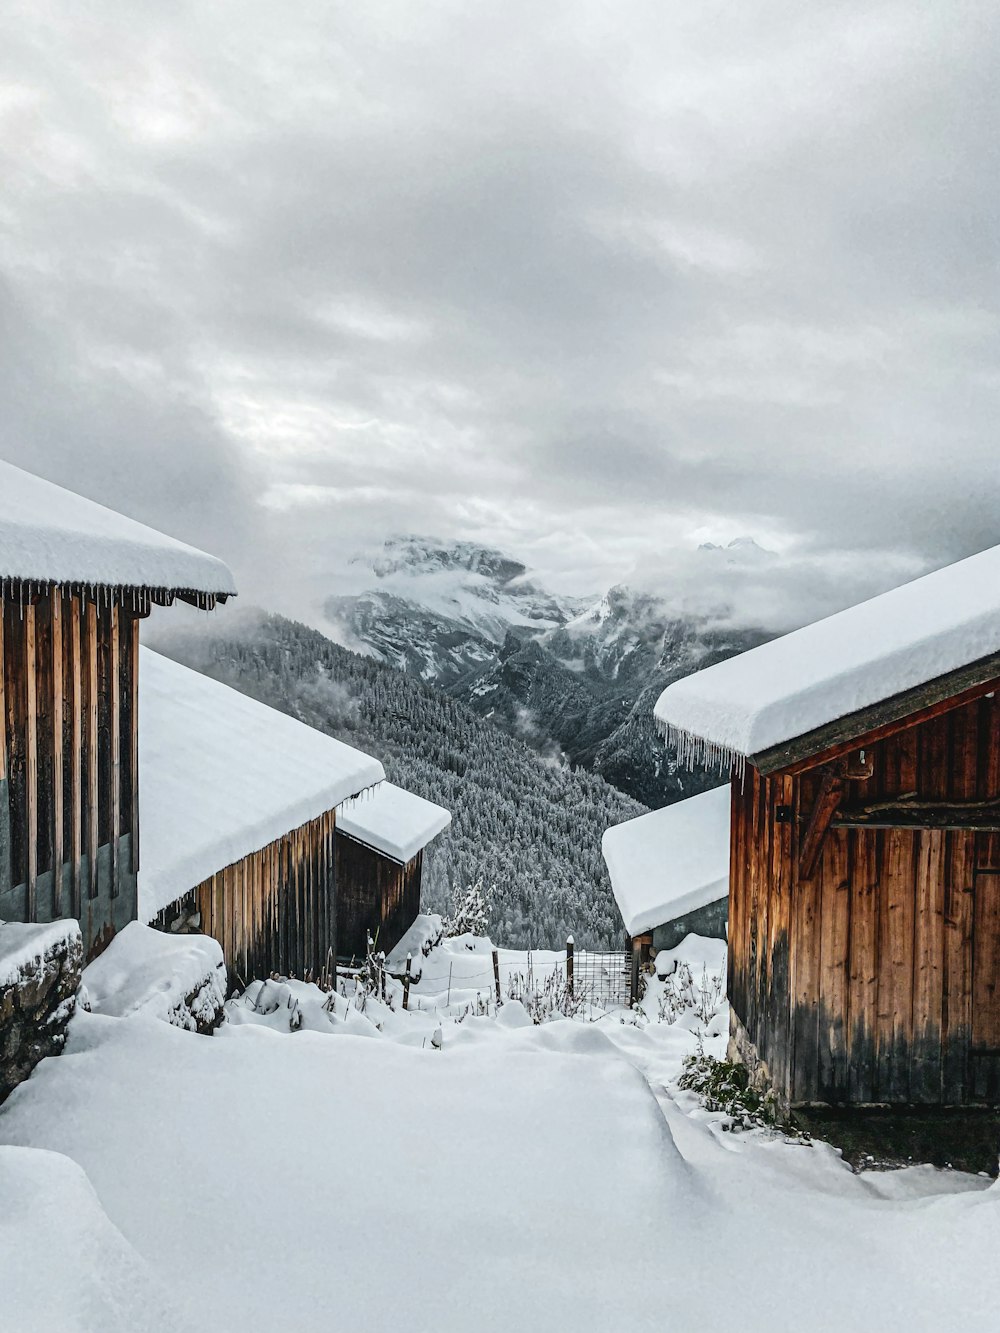 a couple of wooden buildings sitting on top of a snow covered slope